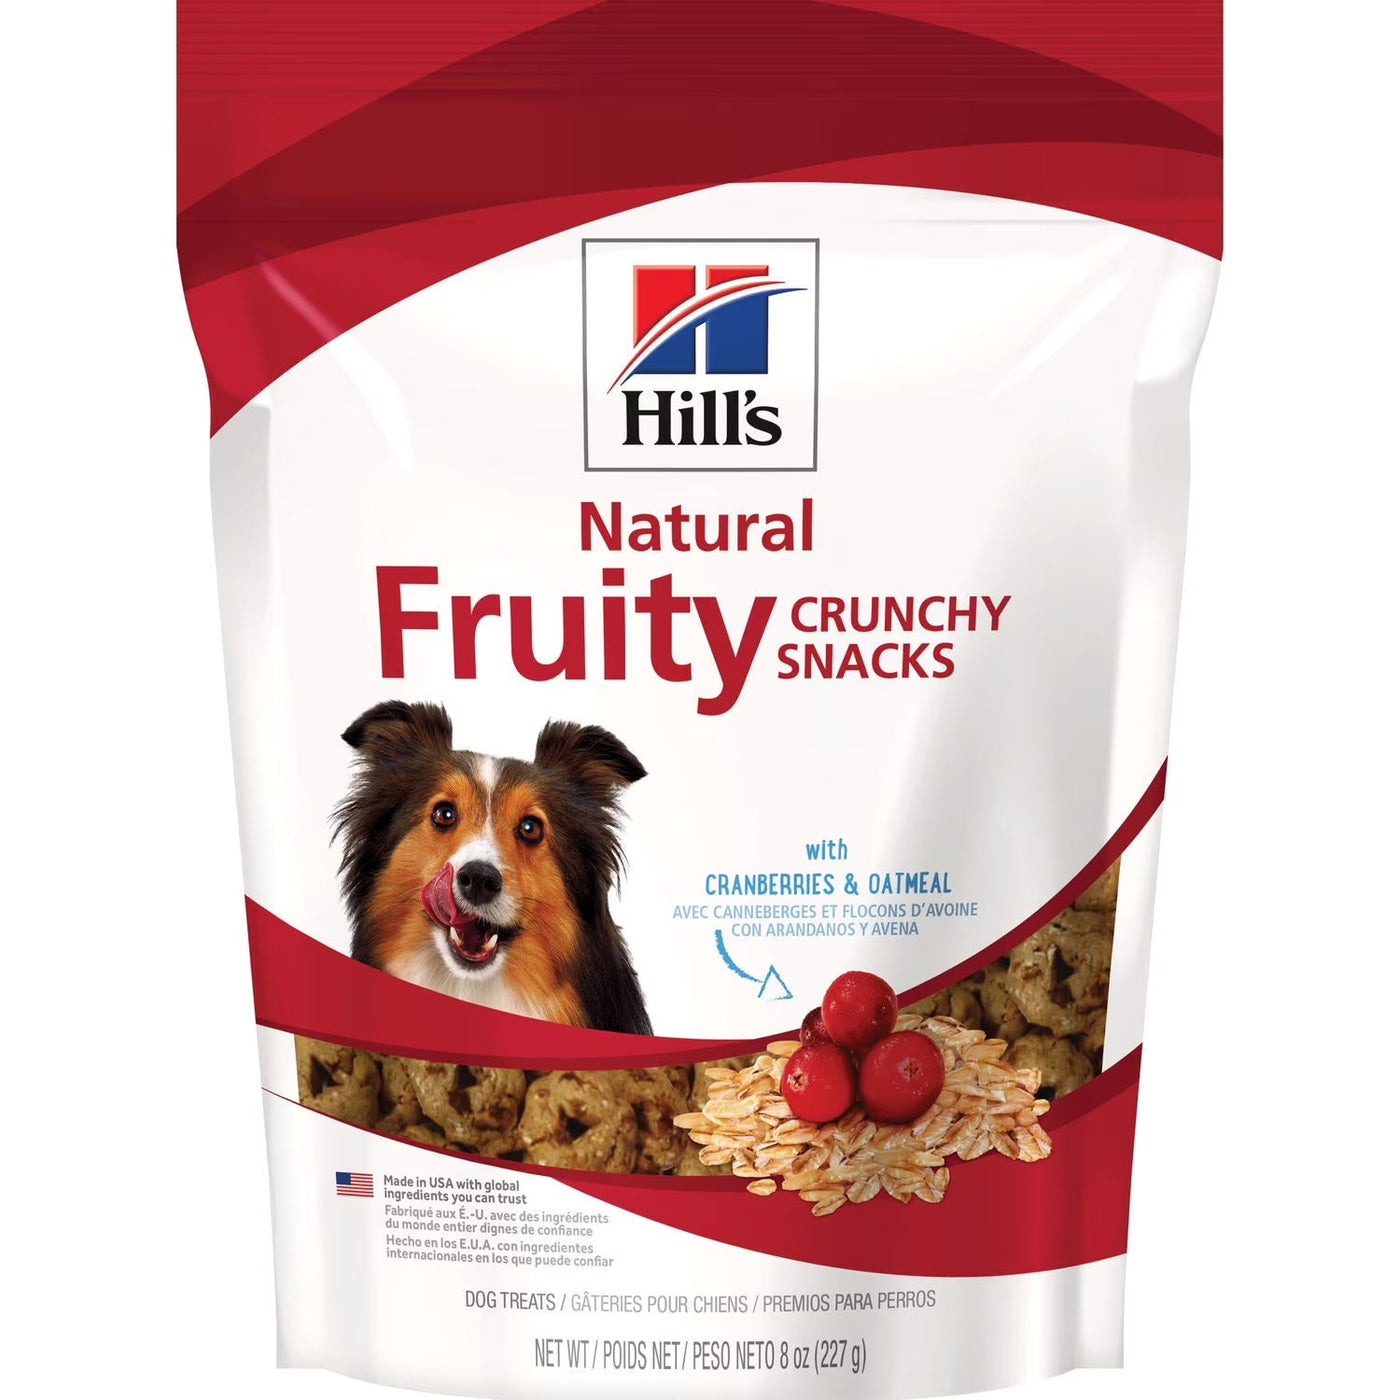 Hill's Natural Fruity Crunchy Snacks with Cranberries & Oatmeal - Dog Treats - Hill's Science Diet